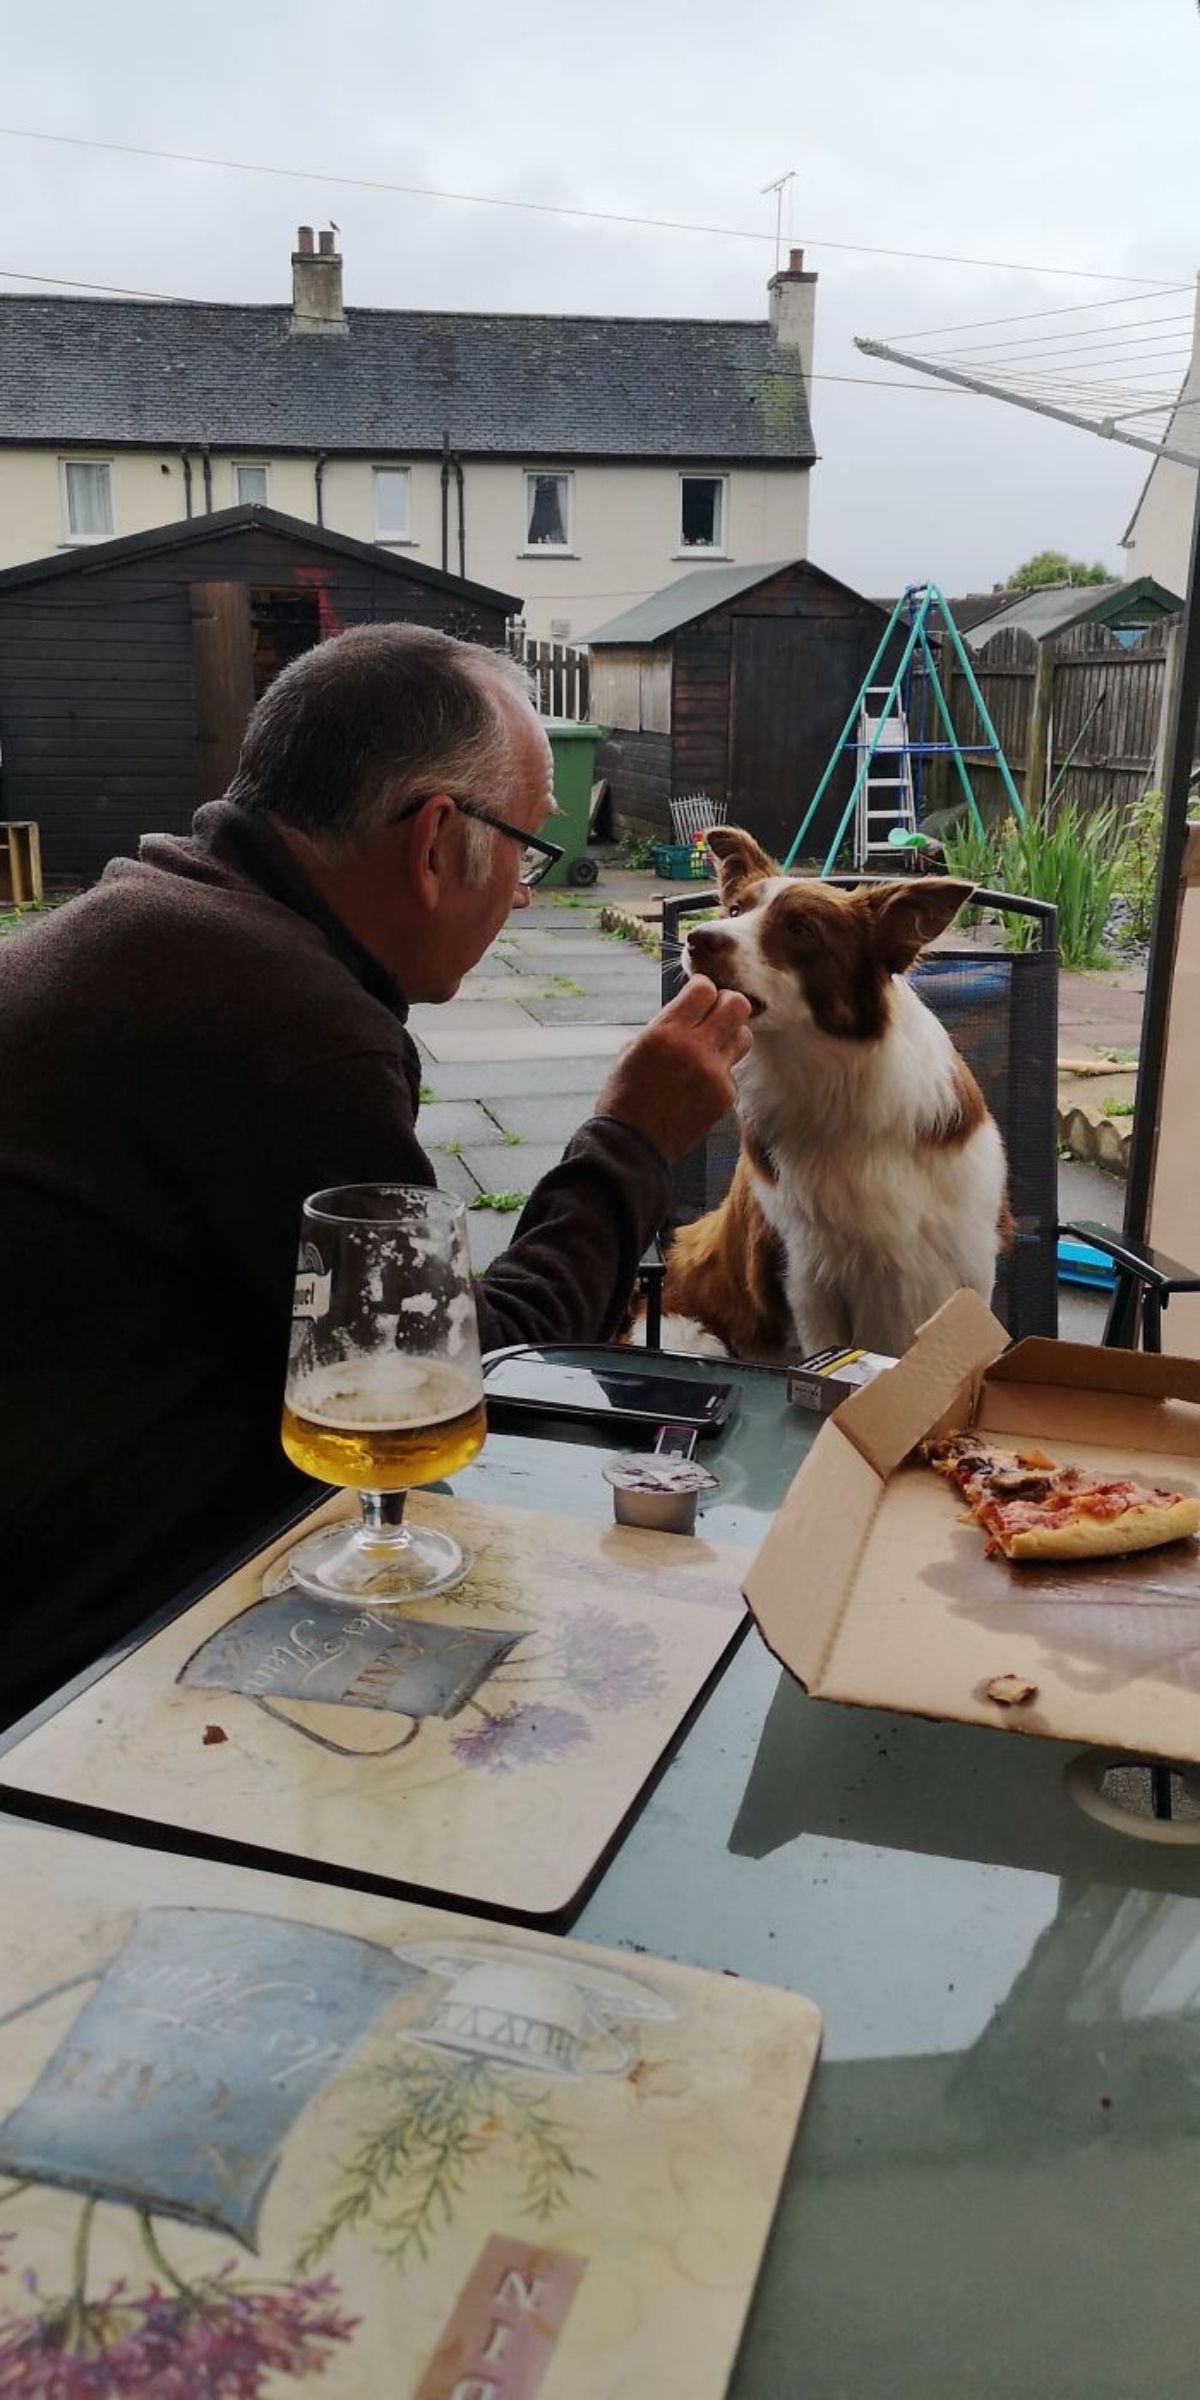 fluffy brown and white dog sitting on a chair at a table and being fed pizza by an old man